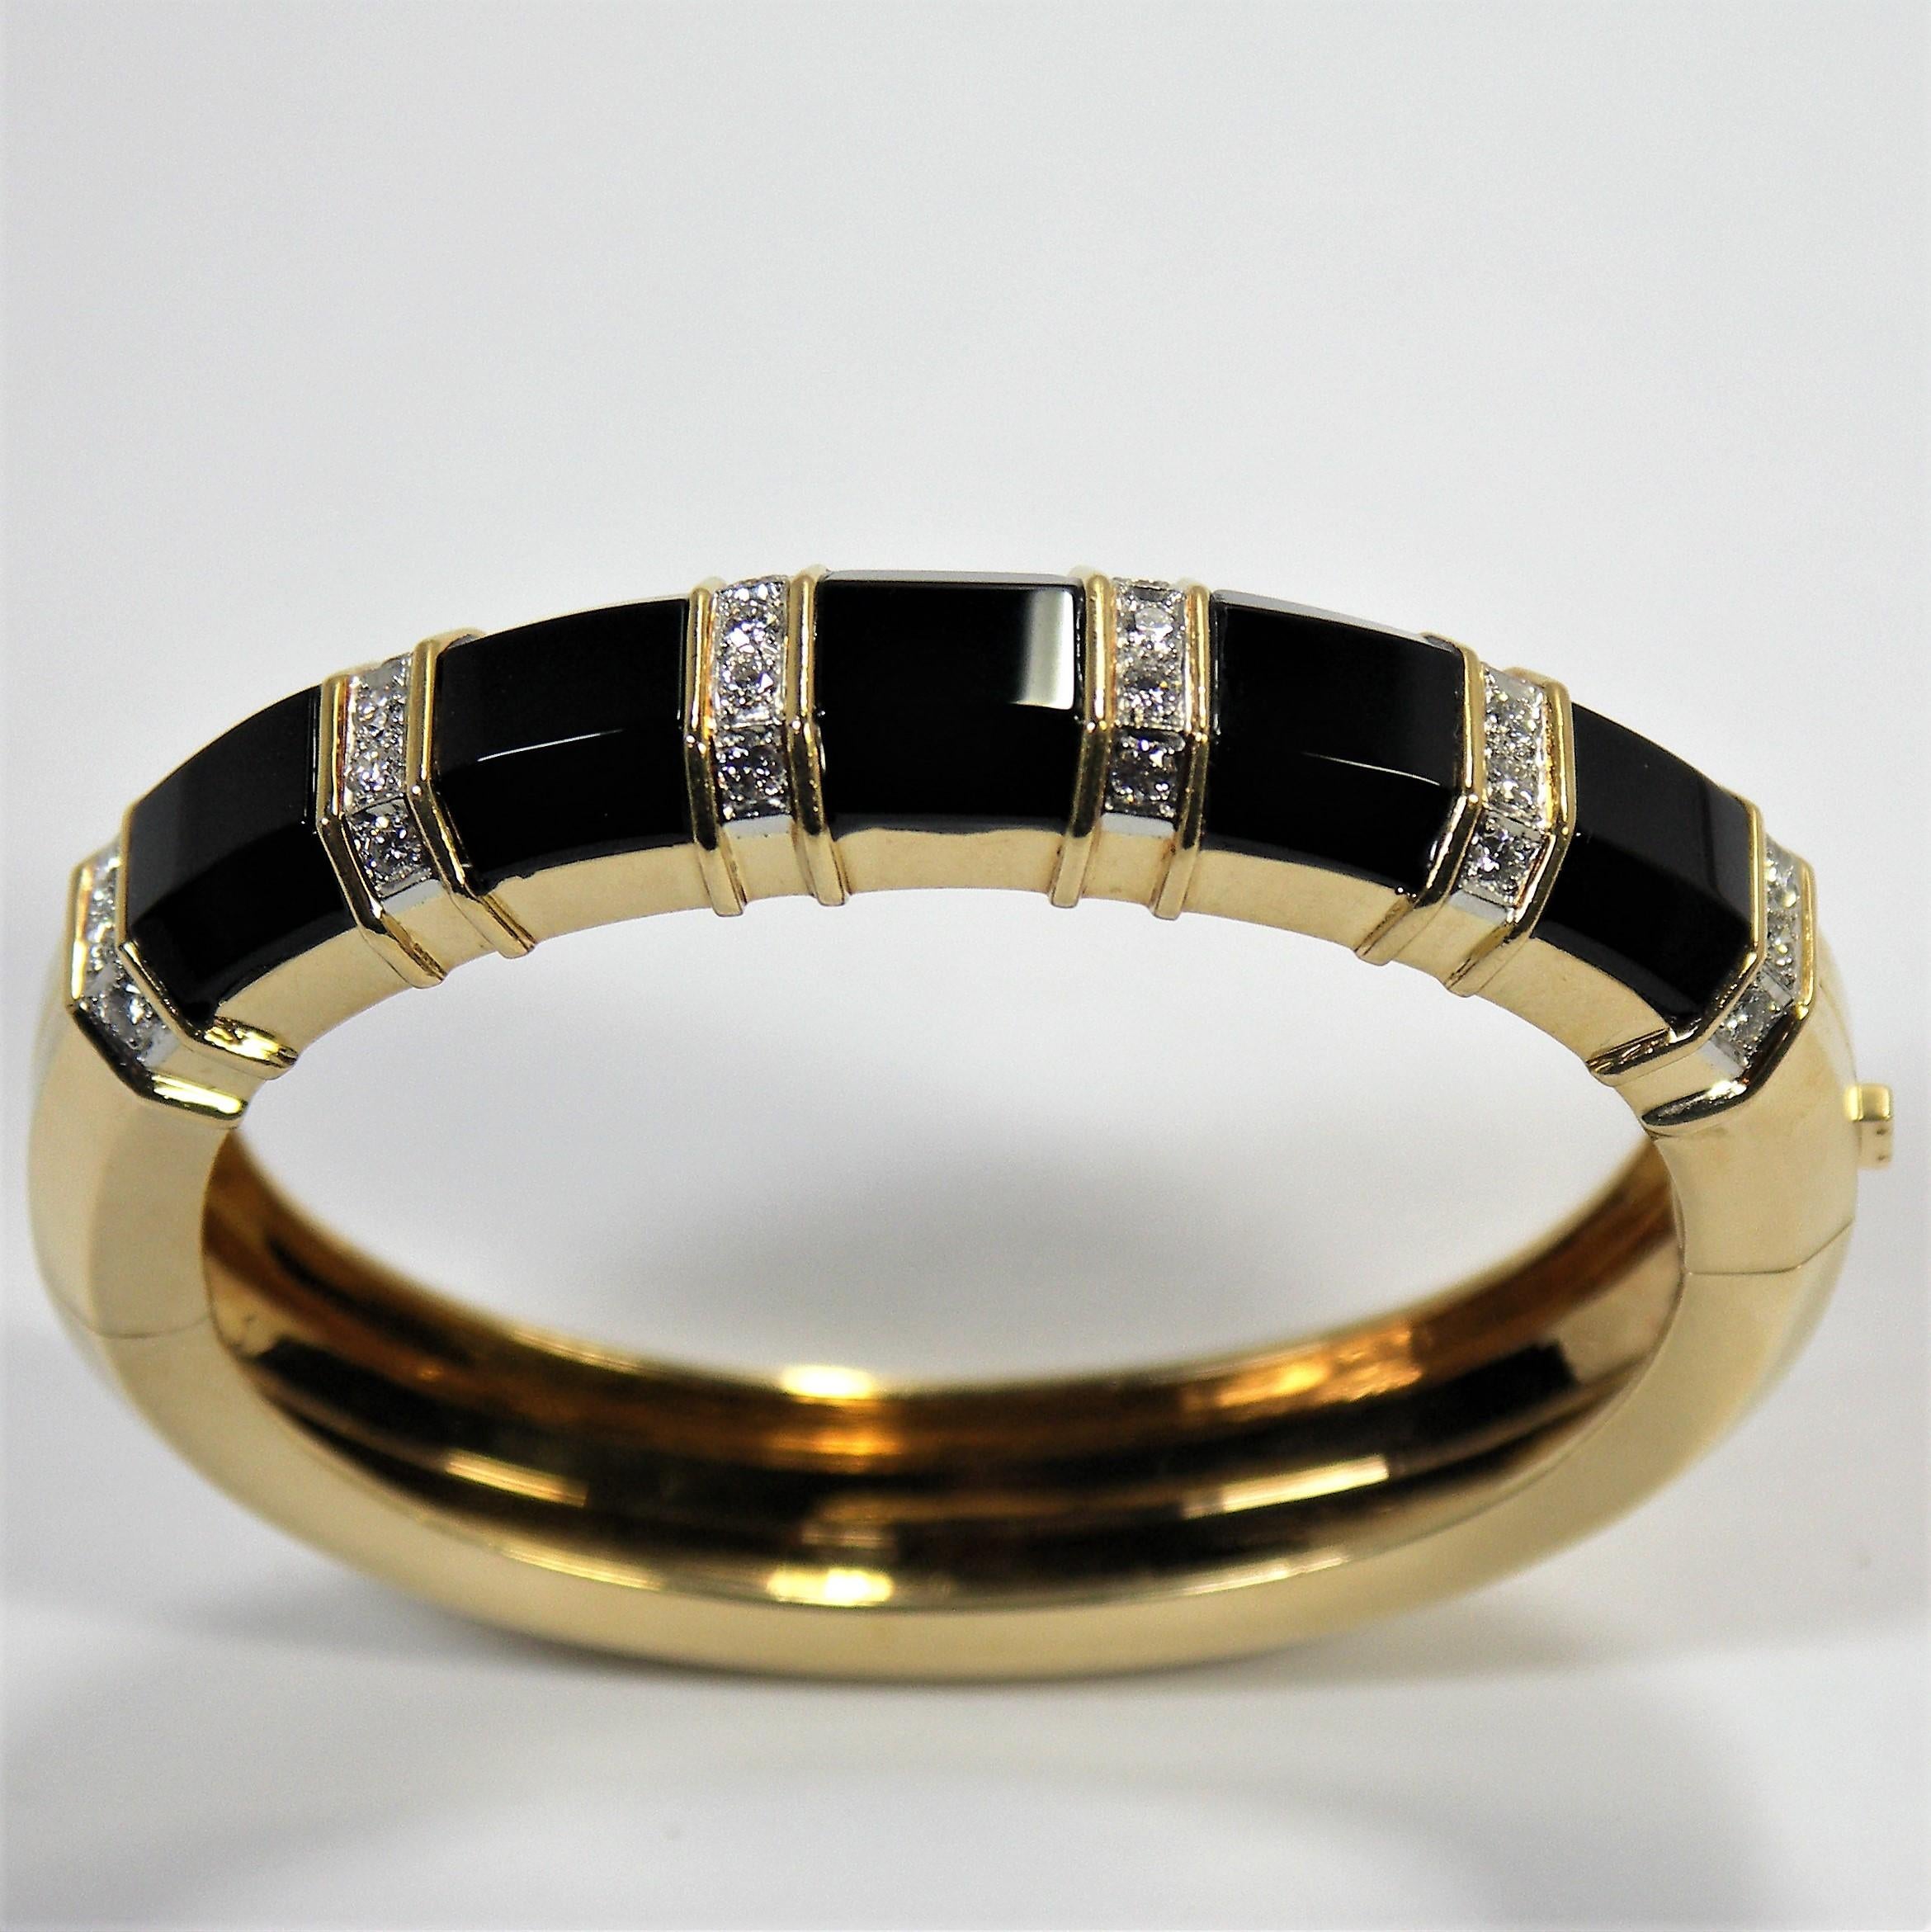 A great every day bangle for any woman who wants an outstanding casual bracelet.
It is smart, tailored and elegant, all at the same time. Made of 18K Yellow Gold and
set with 24 round brilliant cut diamonds weighing an approximate total of 1.25Ct